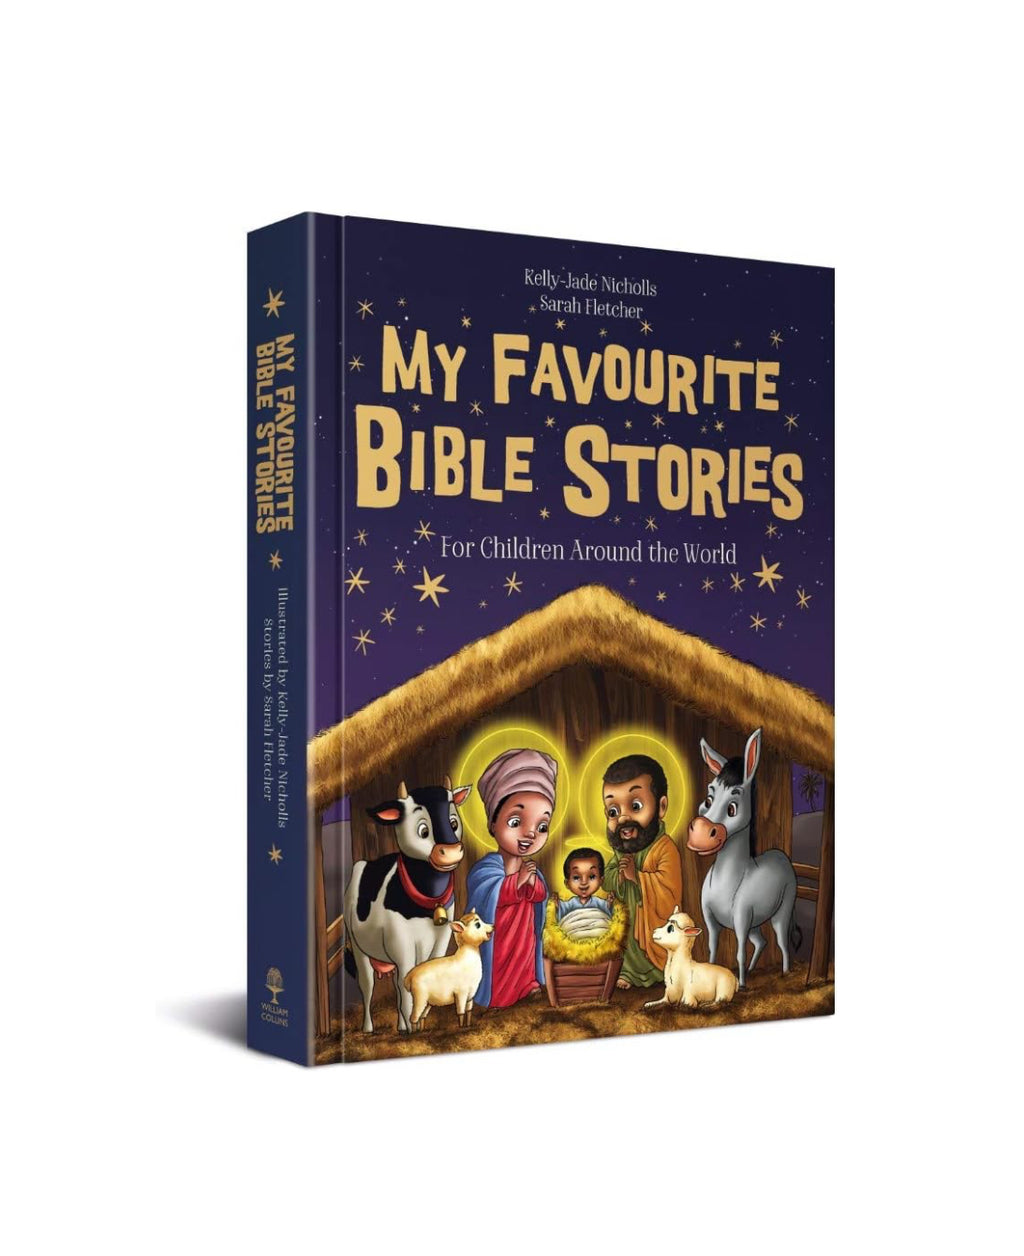 My Favourite Bible Stories - I AM INTENTIONAL 